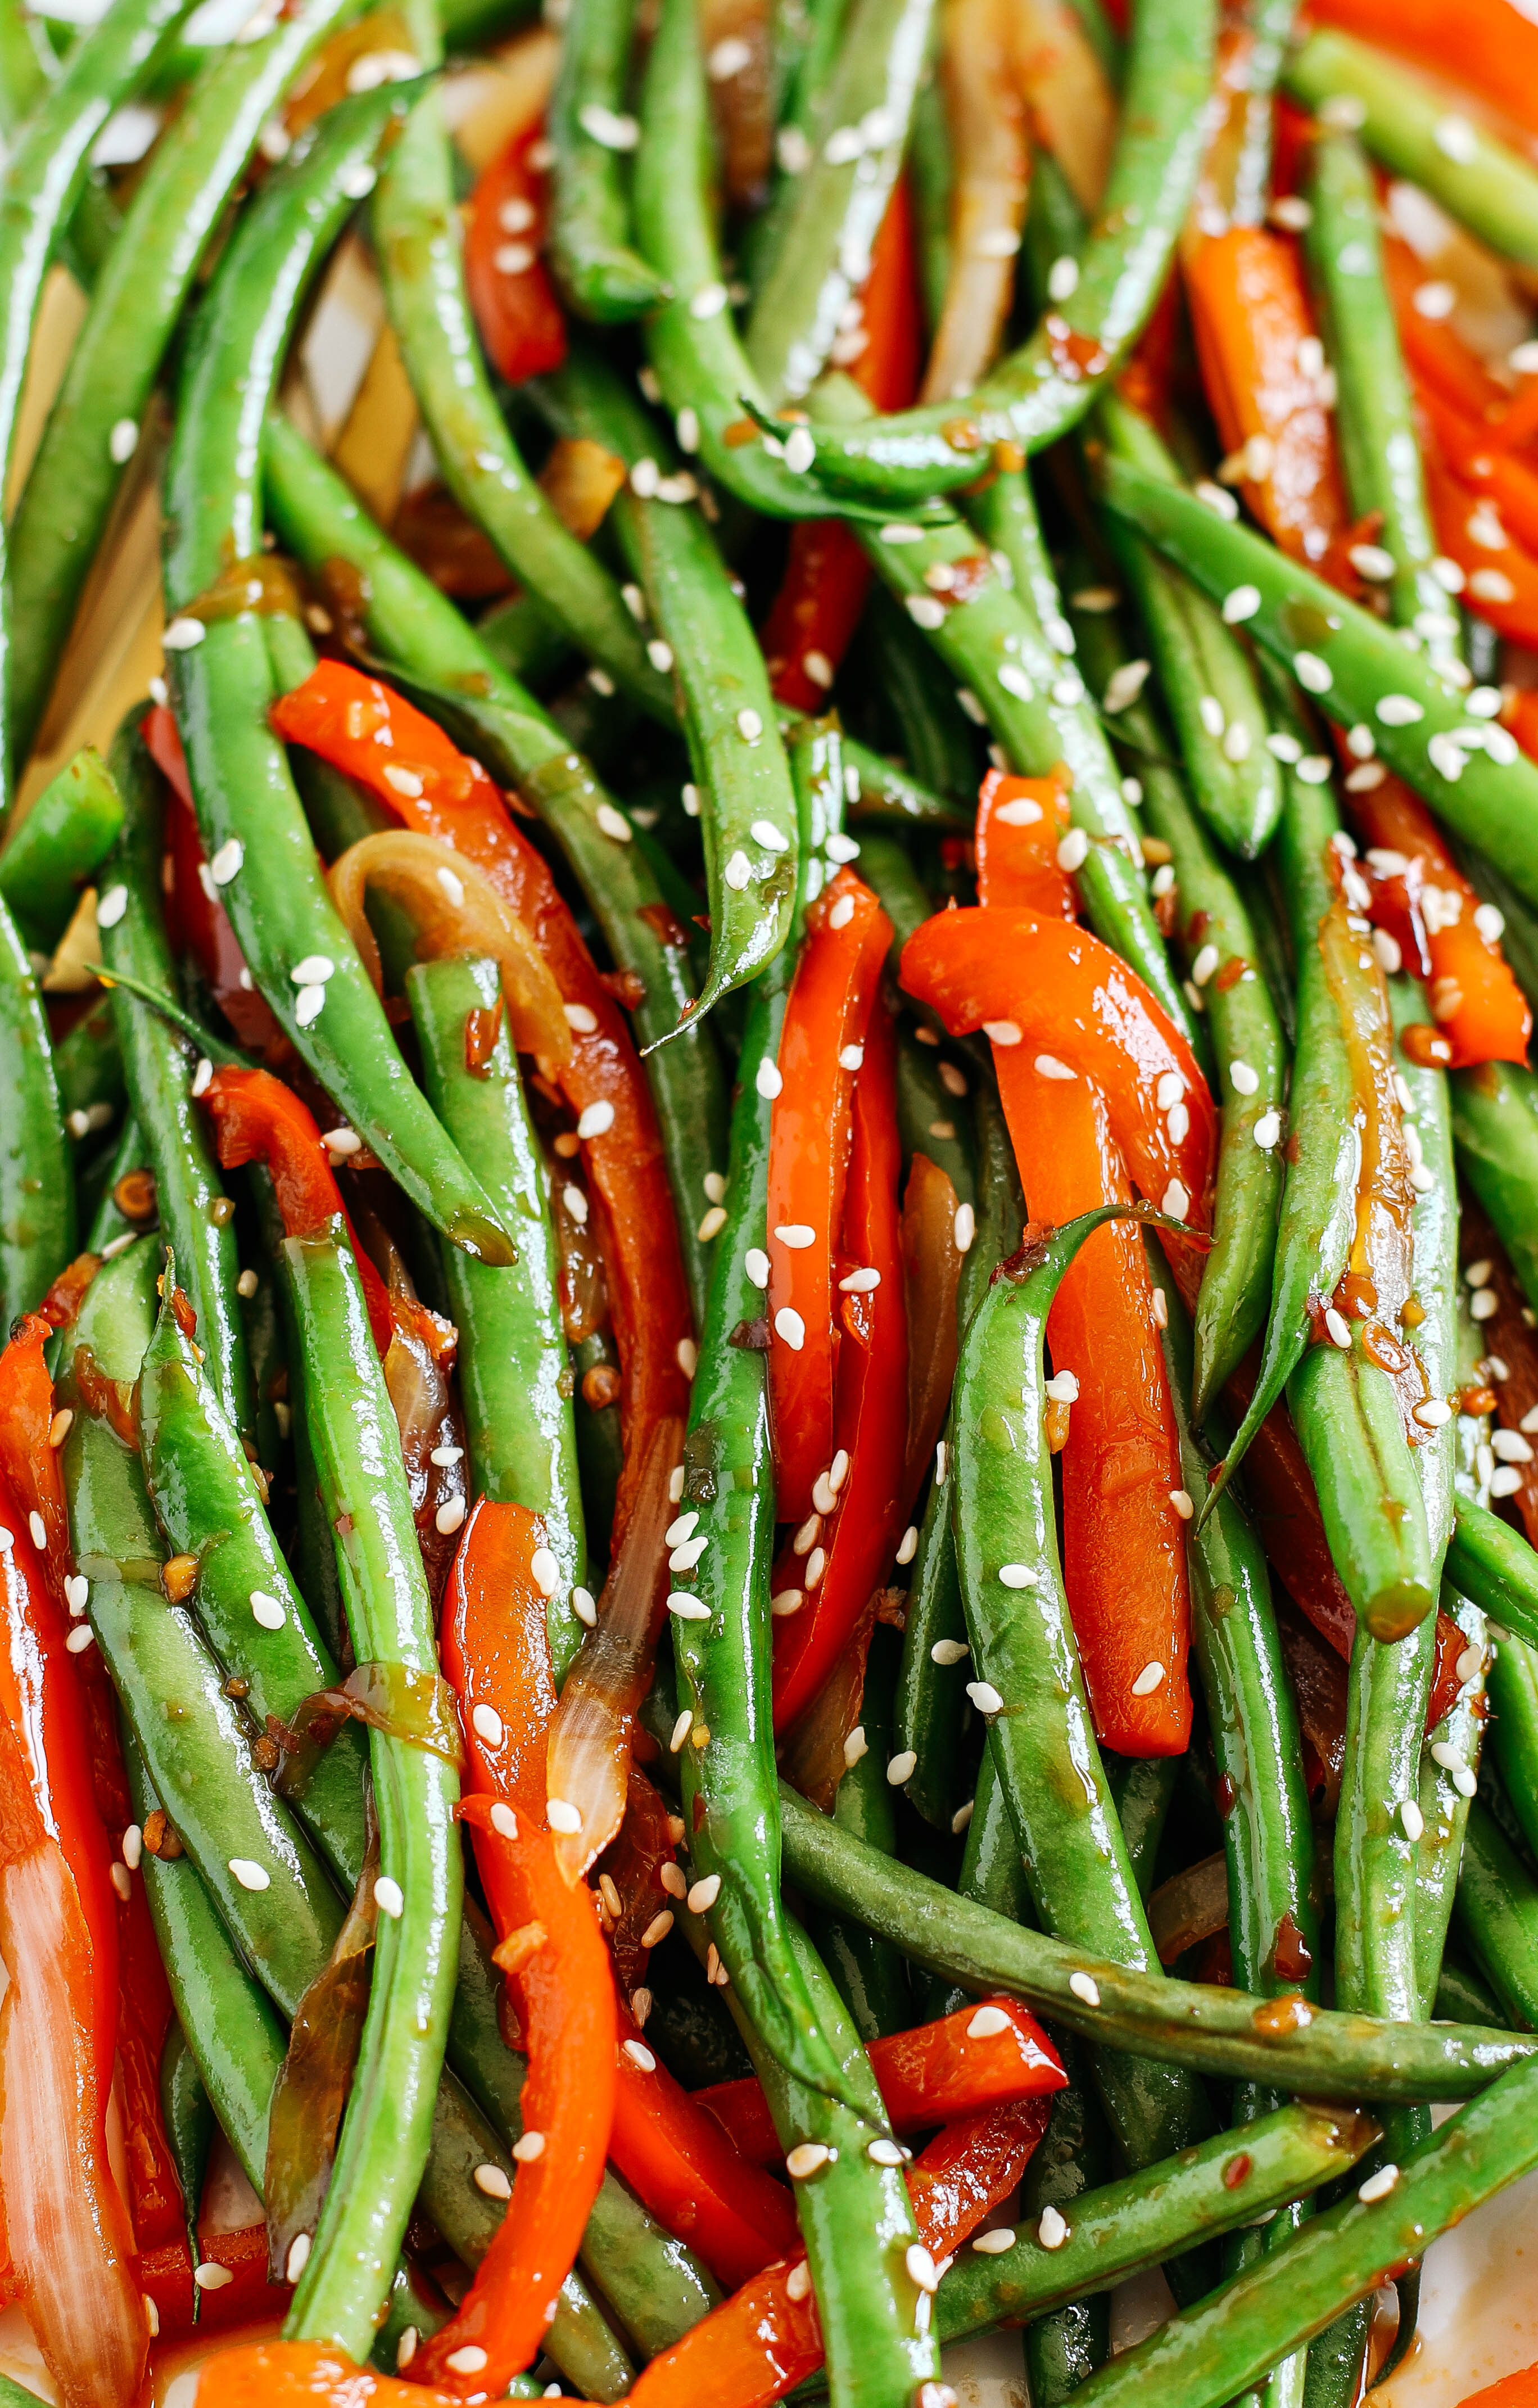 Delicious Ginger Soy Glazed Green Beans and Peppers make a quick and easy side dish that is full of flavor and tastes like you ordered them from your favorite Asian restaurant!  